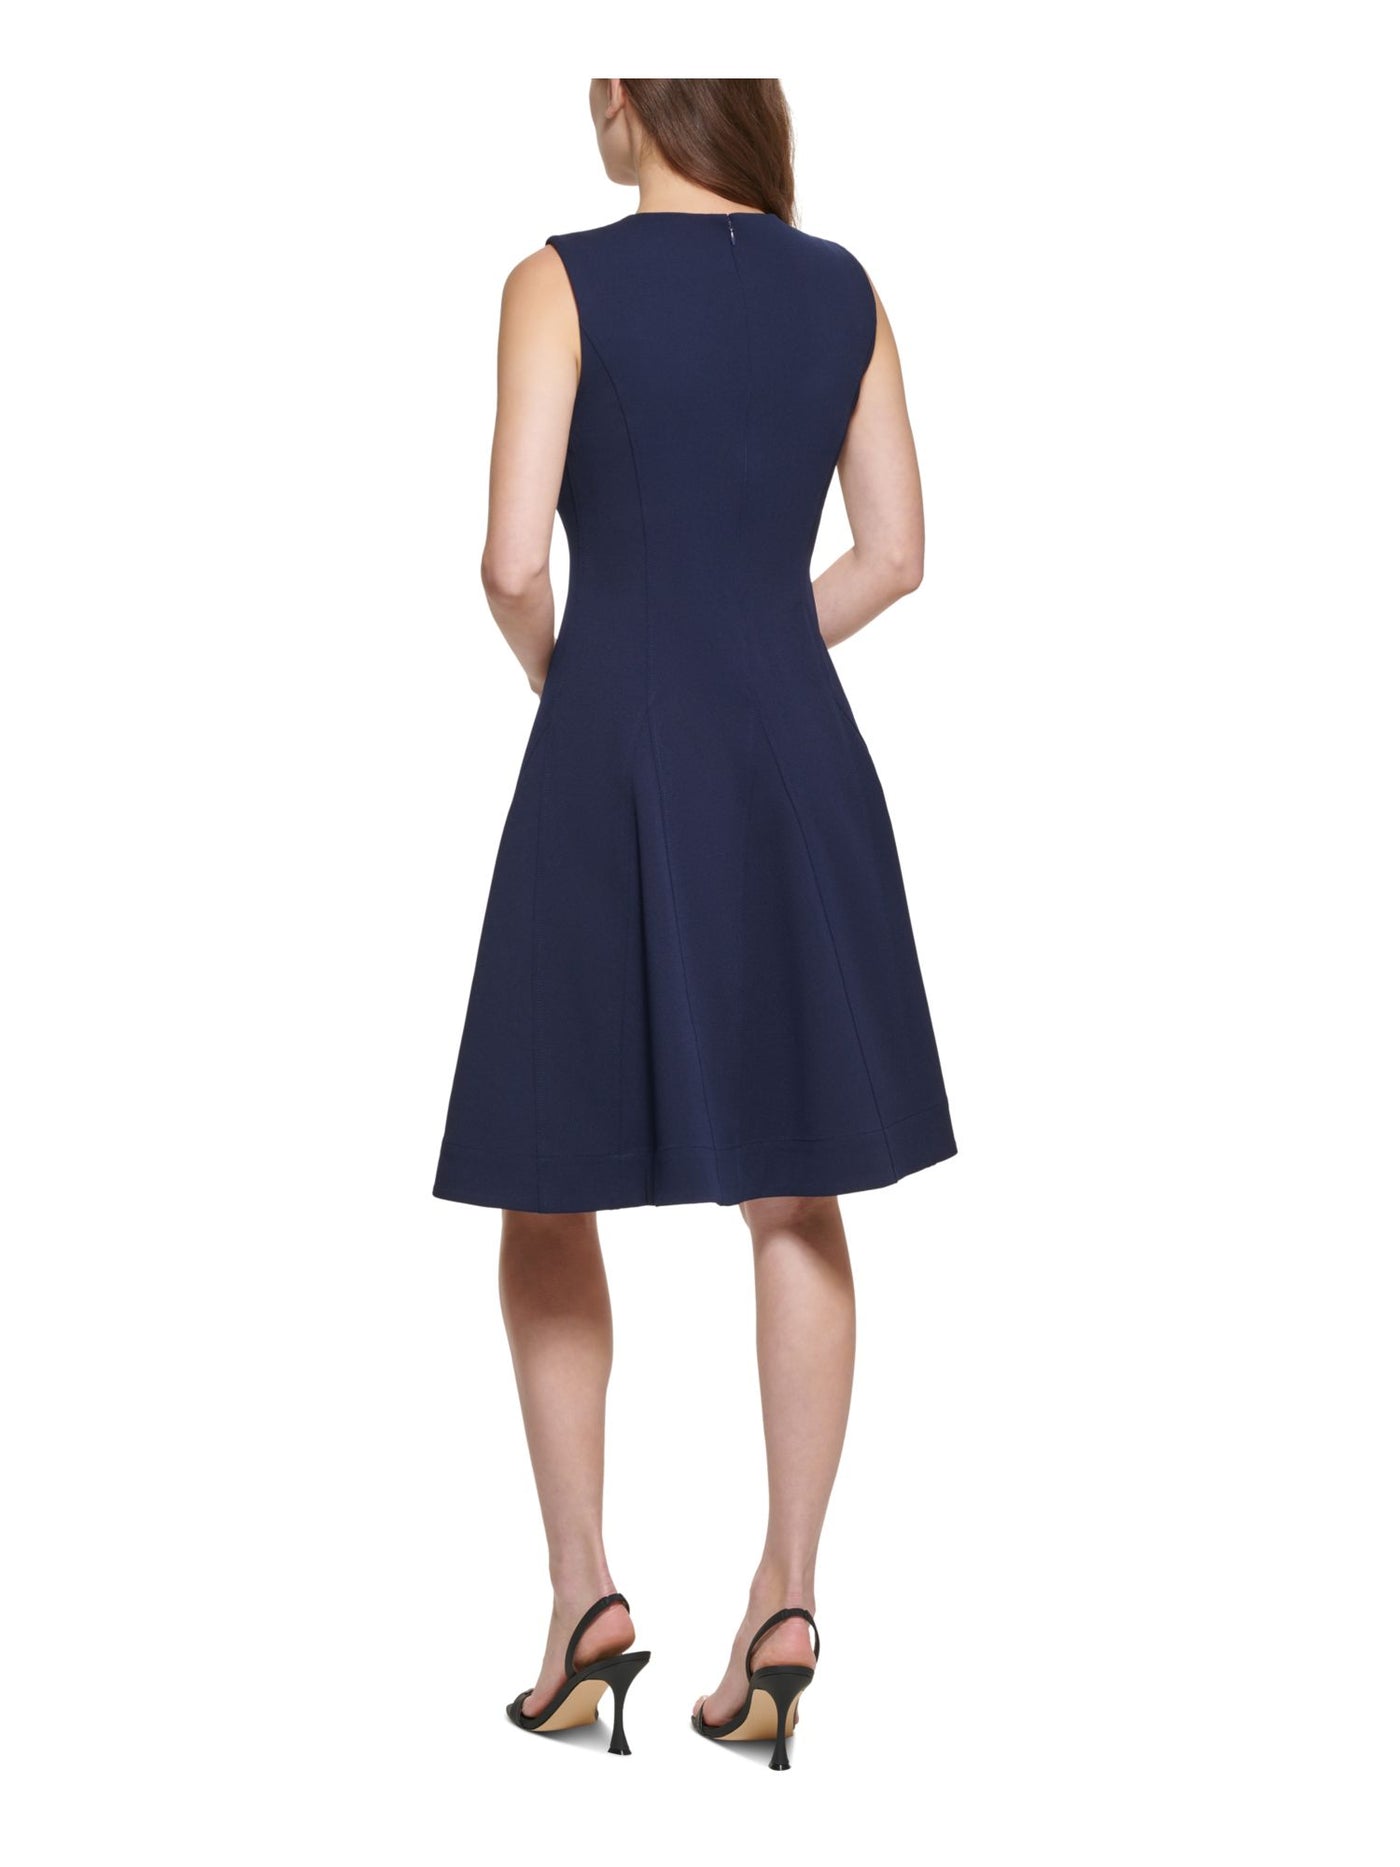 CALVIN KLEIN Womens Navy Zippered Textured Sleeveless Jewel Neck Above The Knee Wear To Work Fit + Flare Dress 6